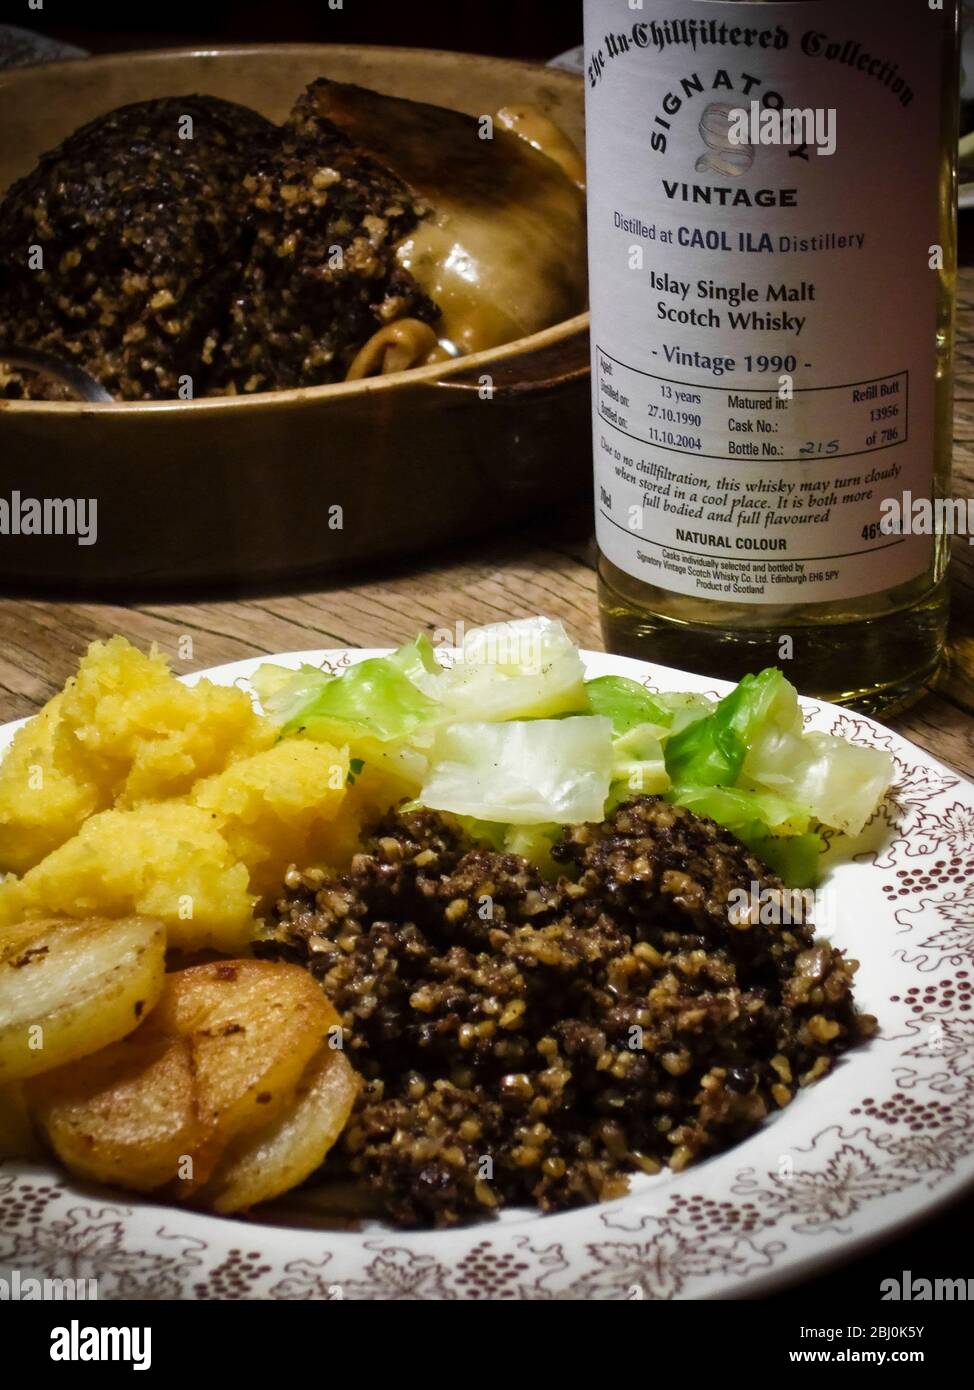 Haggis with superior whisky for Burns night, served with traditional accompaniment of 'bashed neeps' (mashed swede) but with the addition of sauteed p Stock Photo